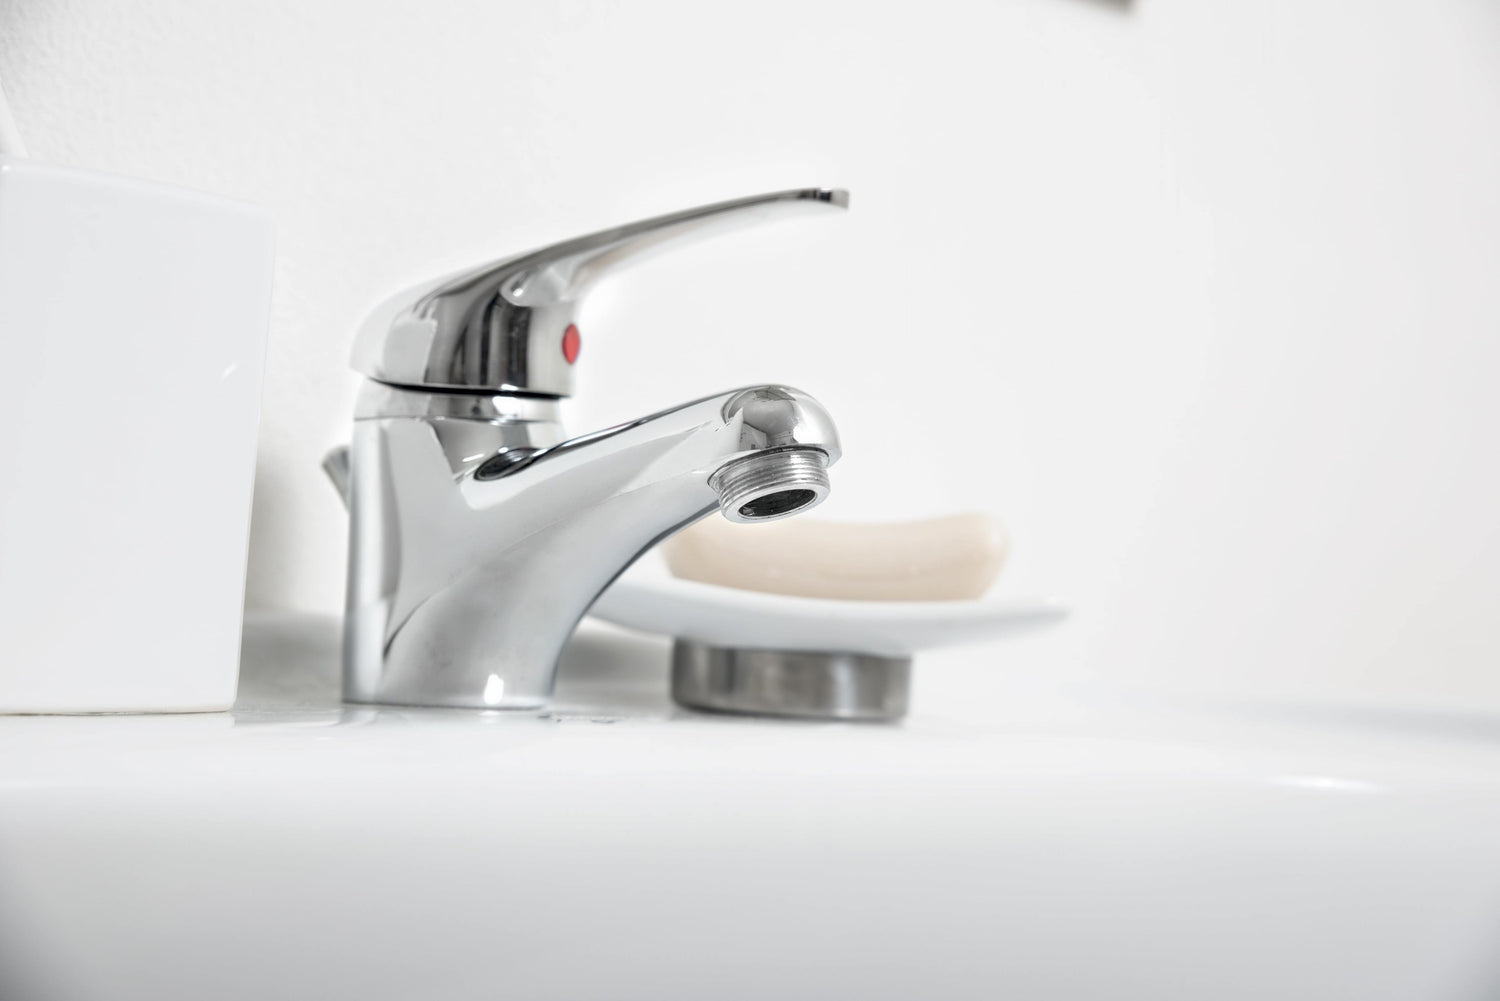 How does it connect to the My Perfect Colon faucet?